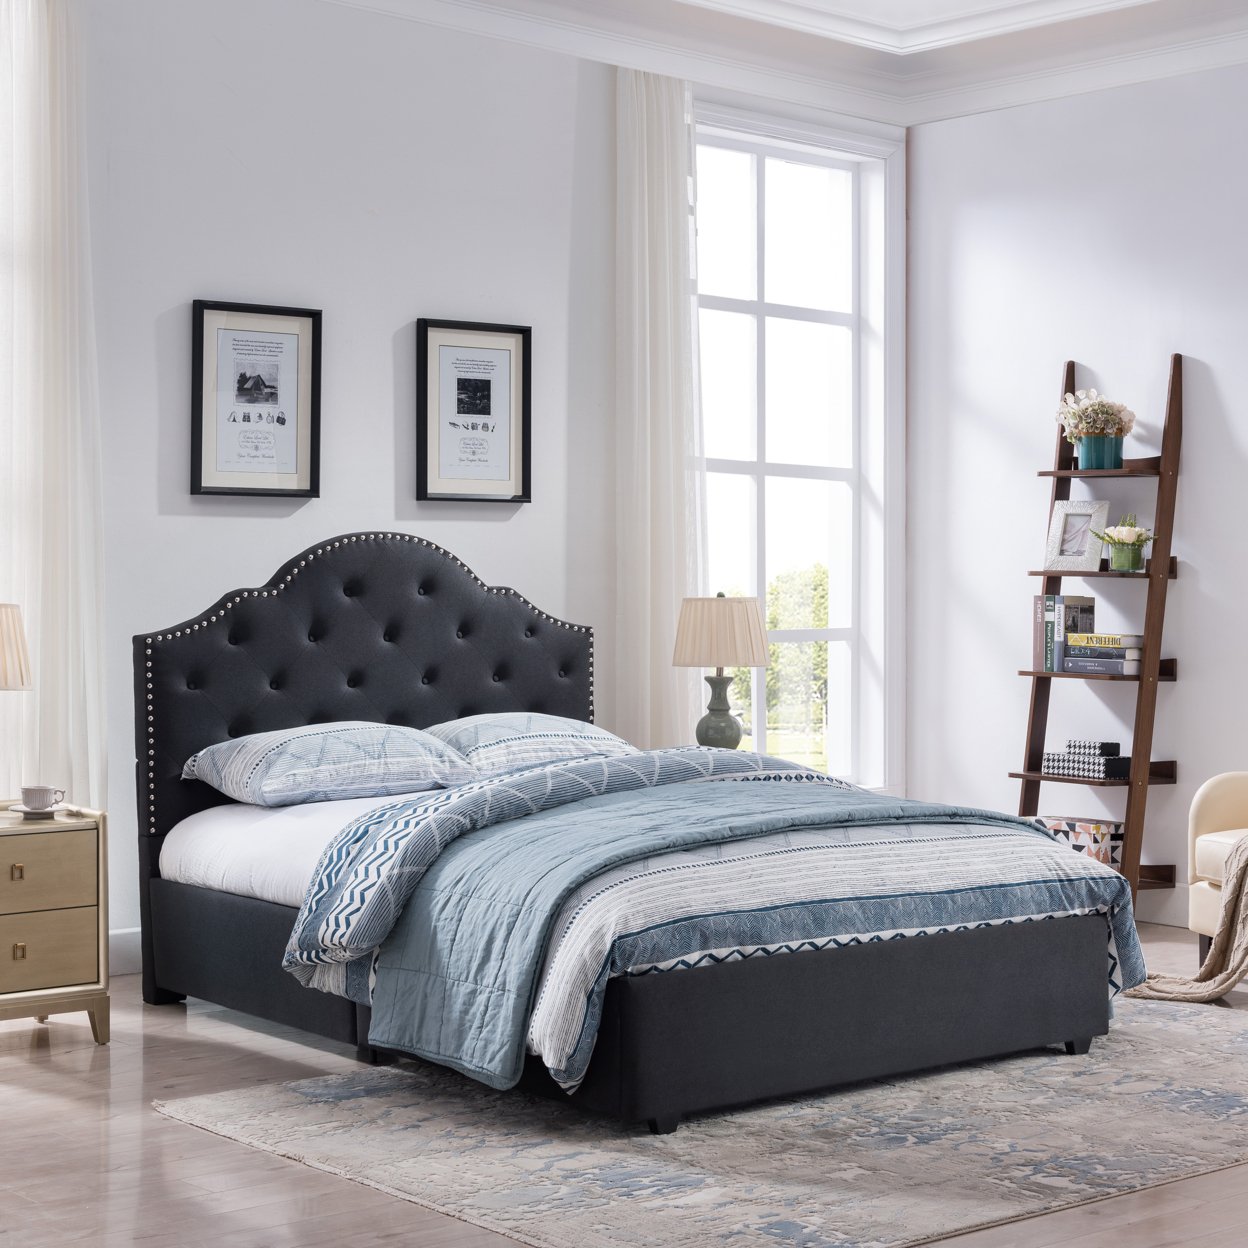 Gentry Contemporary Button-Tufted Upholstered Queen Bed Frame With Nailhead Accents - Black